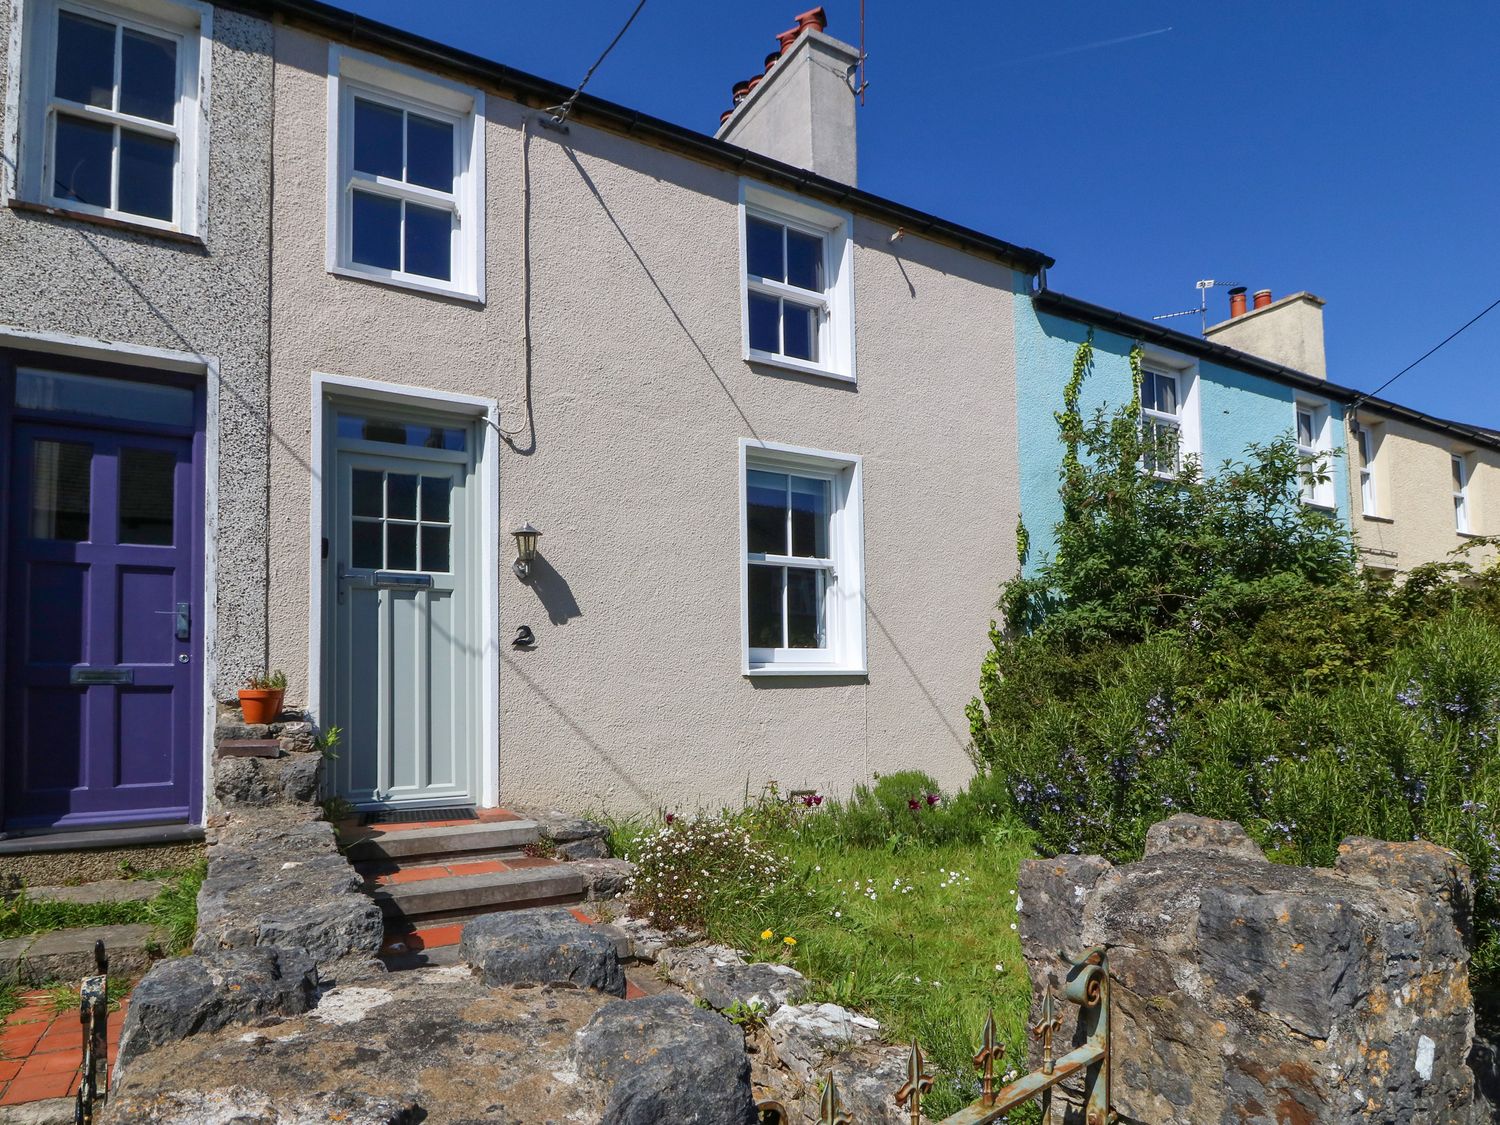 No.2 Coedwig Terrace - Anglesey - 1155232 - photo 1